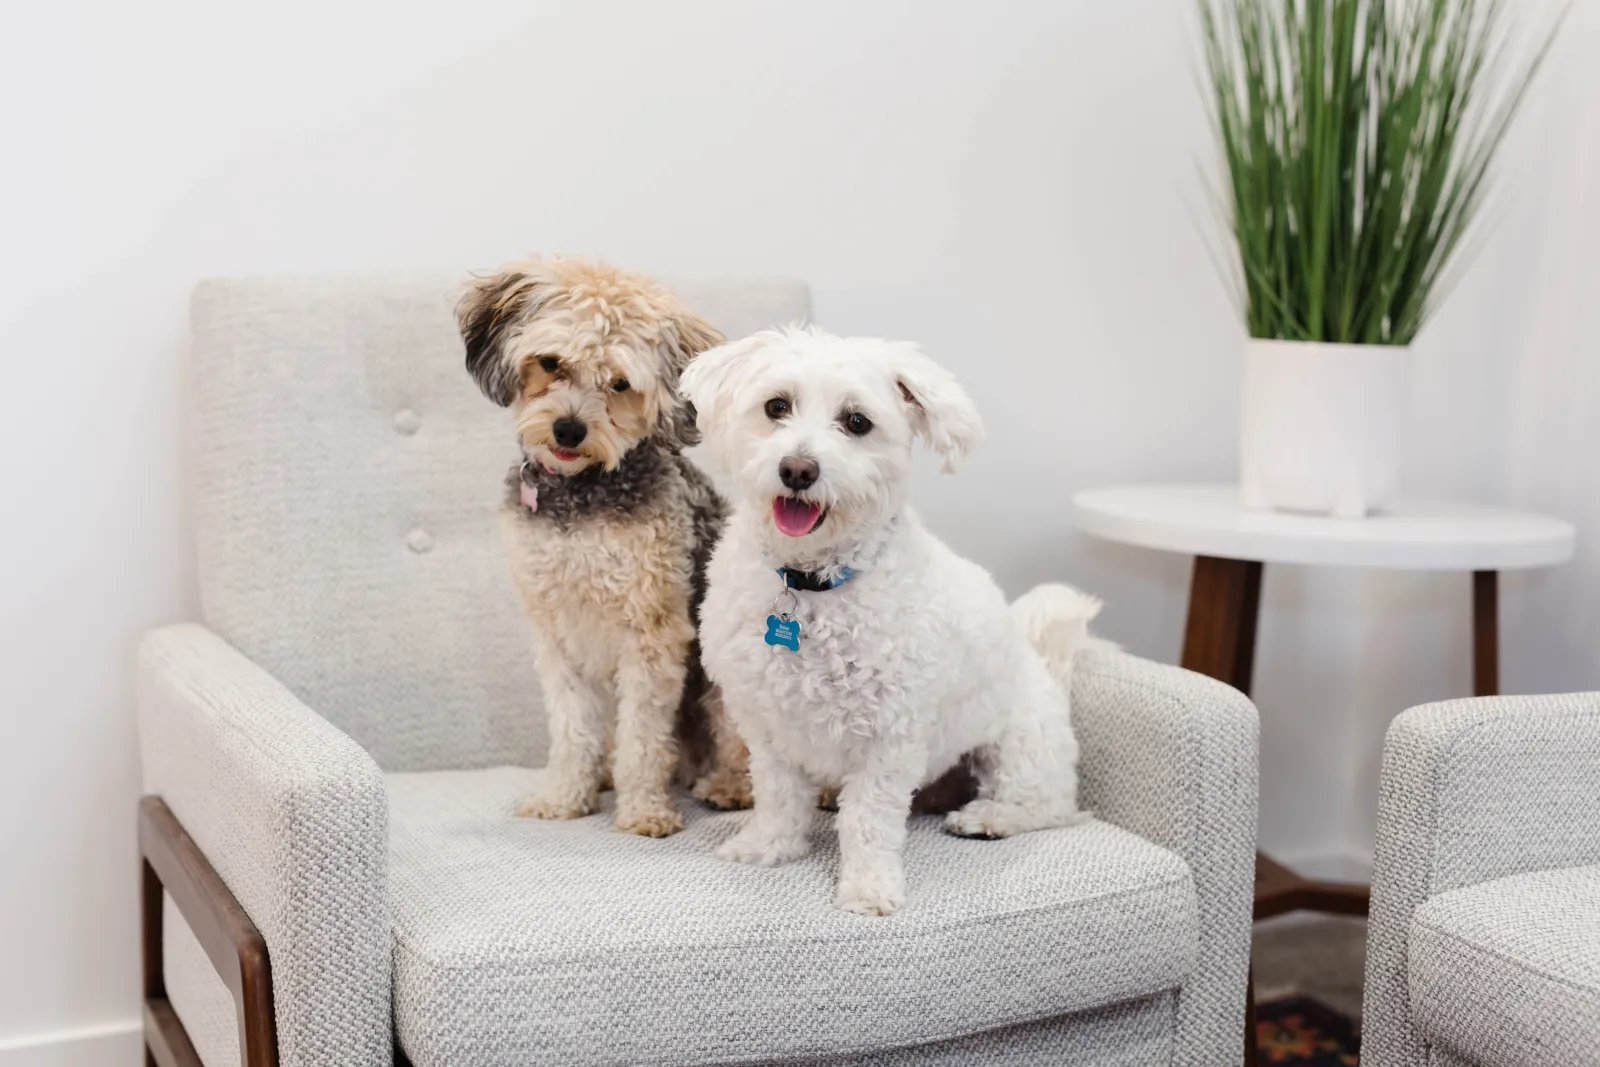 two cute dogs sitting on an upholstered white chair shedding dust, dirt, and dander